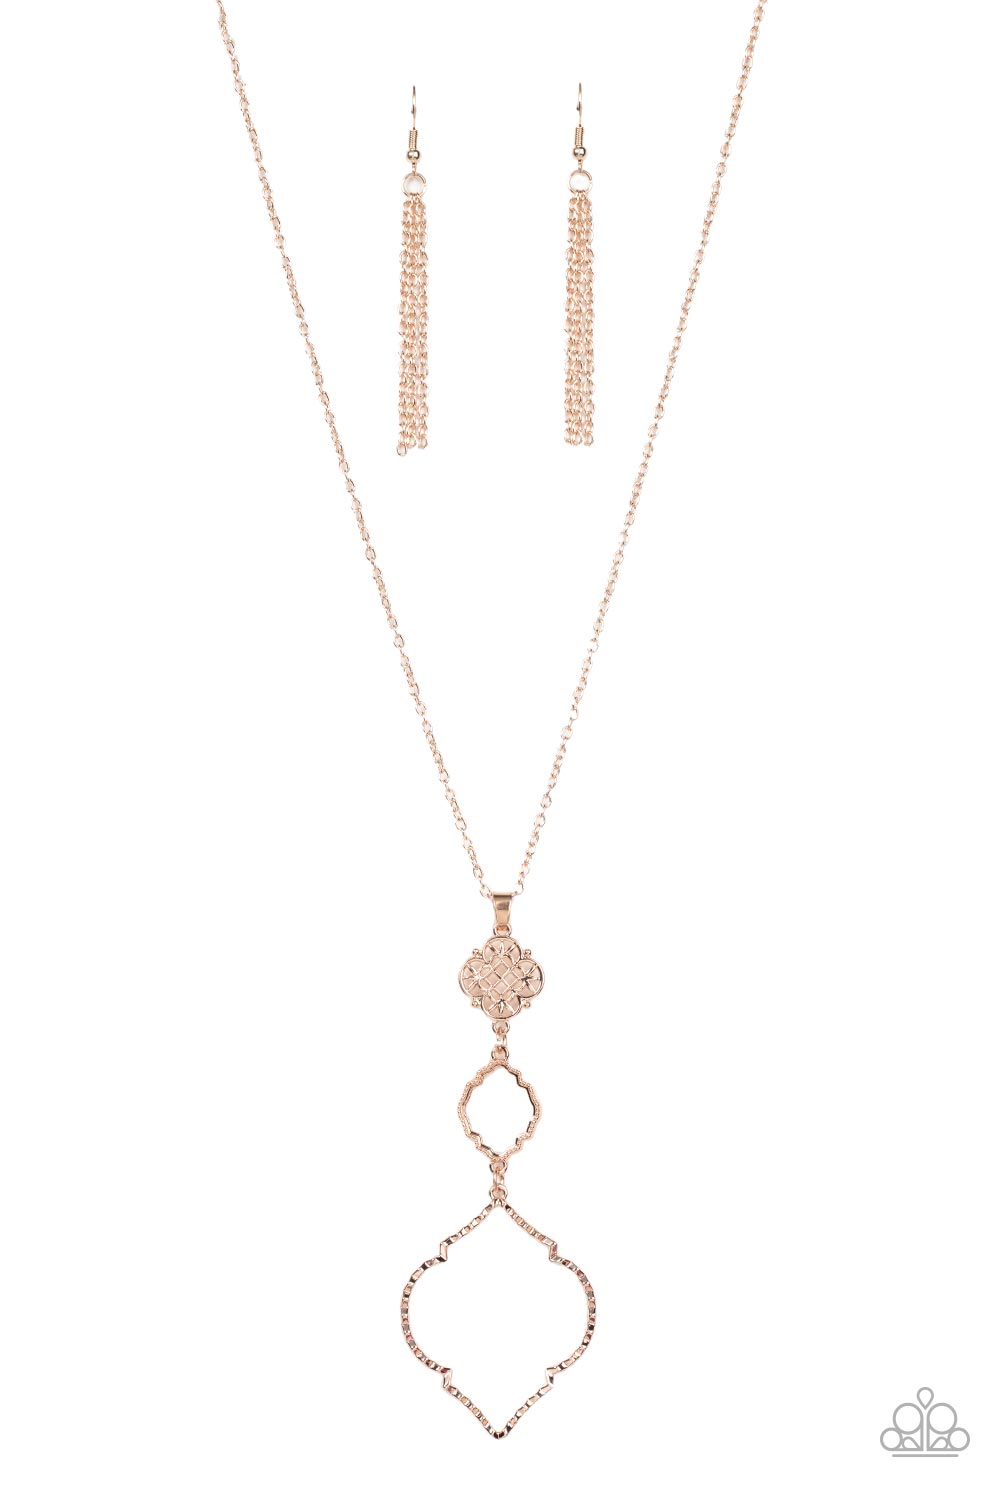 Paparazzi Accessories Marrakesh Mystery - Rose Gold Necklace & Earrings